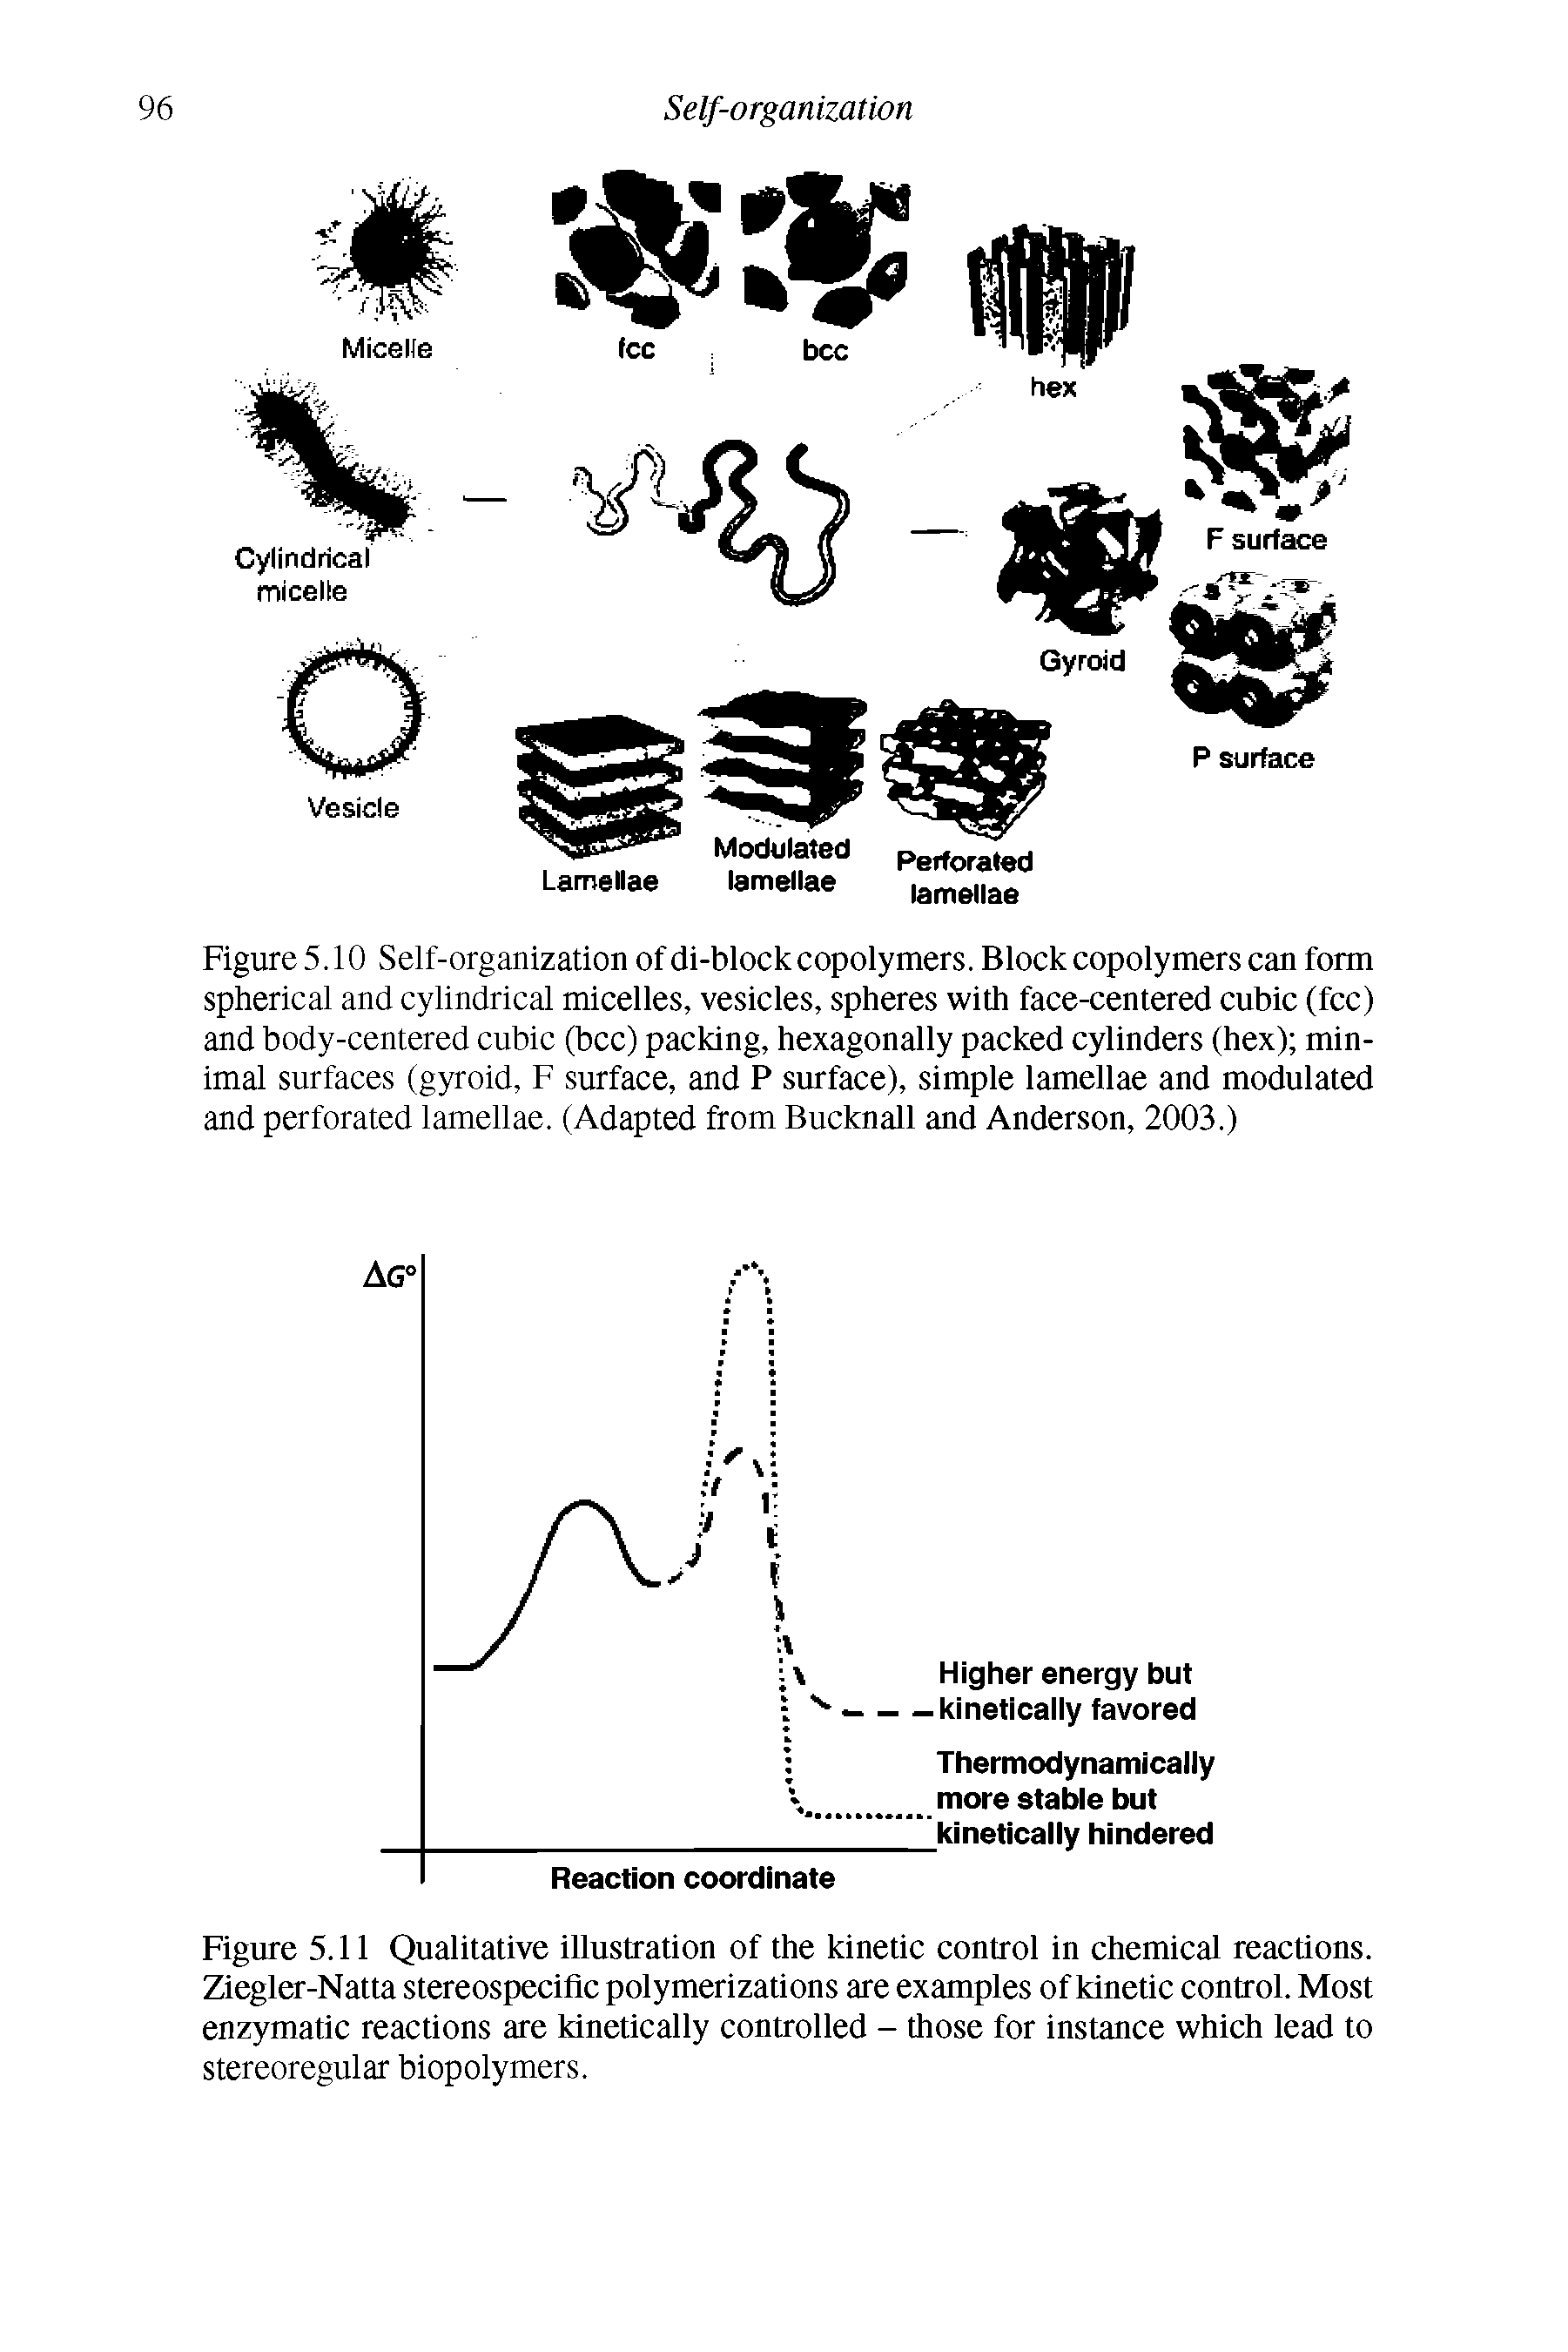 Figure 5.10 Self-organization of di-block copolymers. Block copolymers can form spherical and cylindrical micelles, vesicles, spheres with face-centered cubic (fee) and body-centered cubic (bcc) packing, hexagonally packed cylinders (hex) minimal surfaces (gyroid, F surface, and P surface), simple lamellae and modulated and perforated lamellae. (Adapted from Bucknall and Anderson, 2003.)...